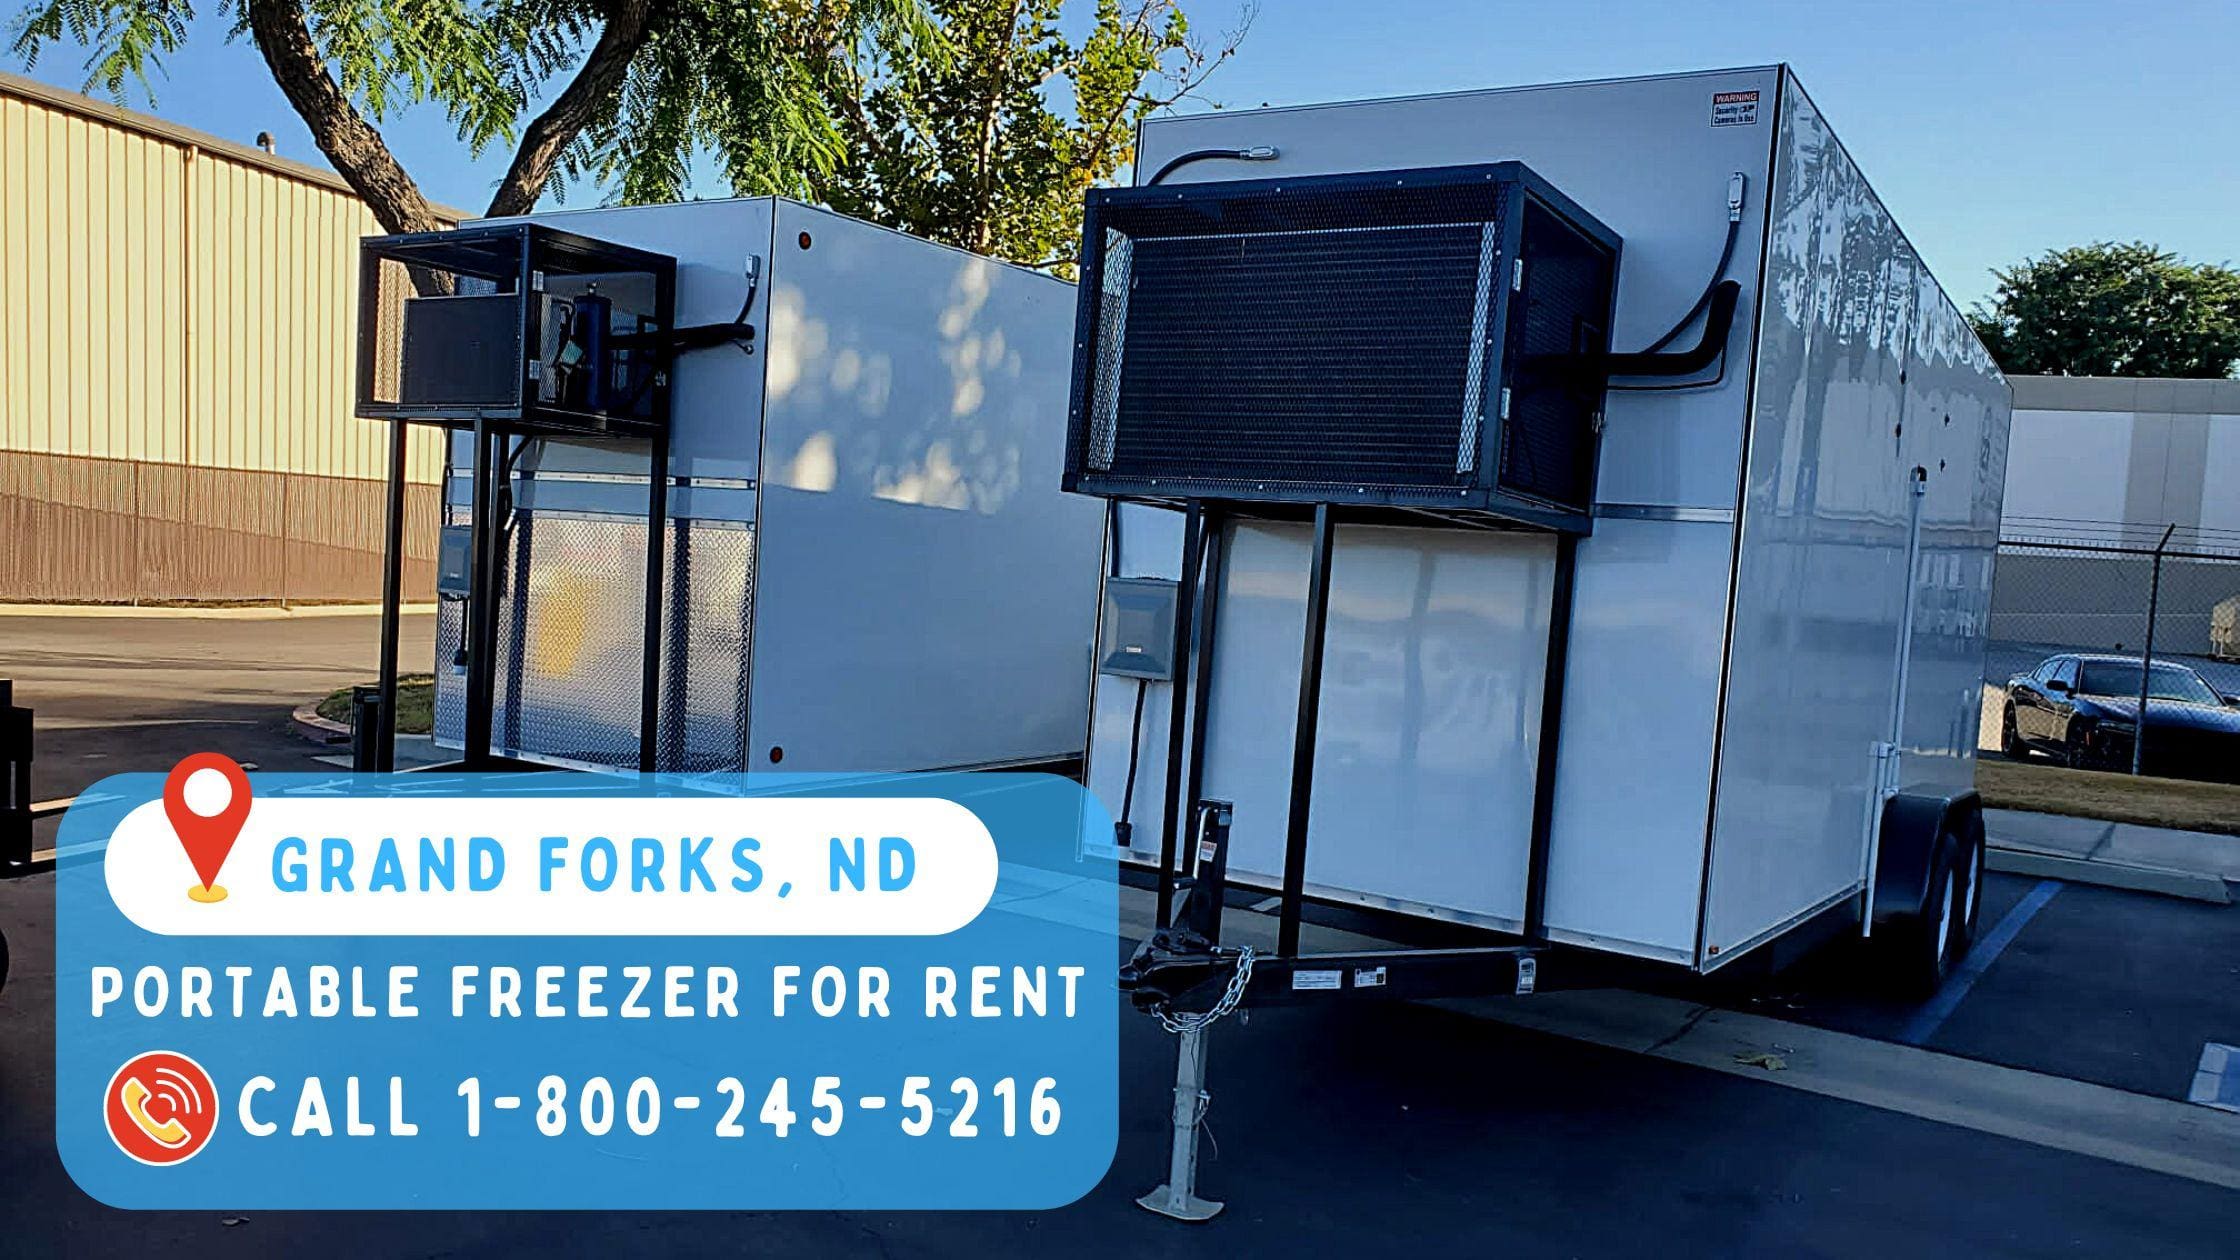 Portable Freezer for Rent in Grand Forks